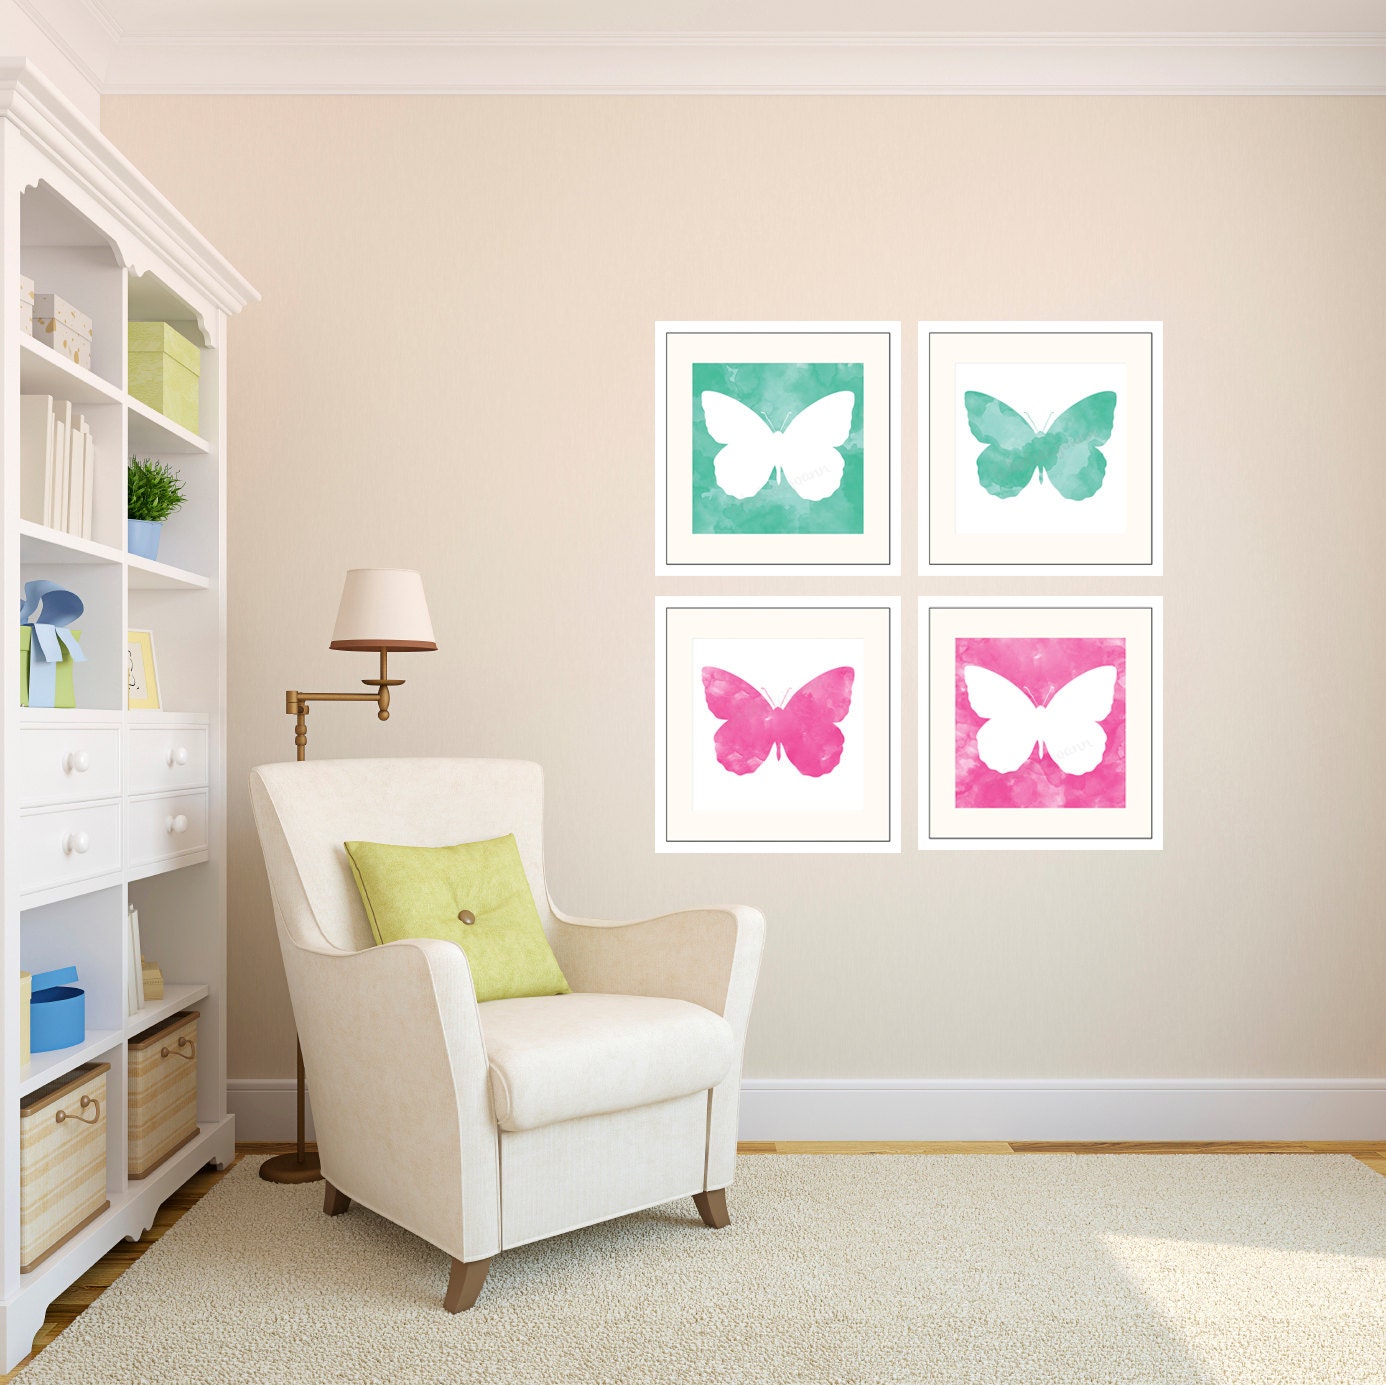 Butterfly Decor Watercolor Art Butterfly Nursery Decor Teal and Pink Decor Butterfly Art Nursery Art Whimsical Baby Shower Gift for daughter